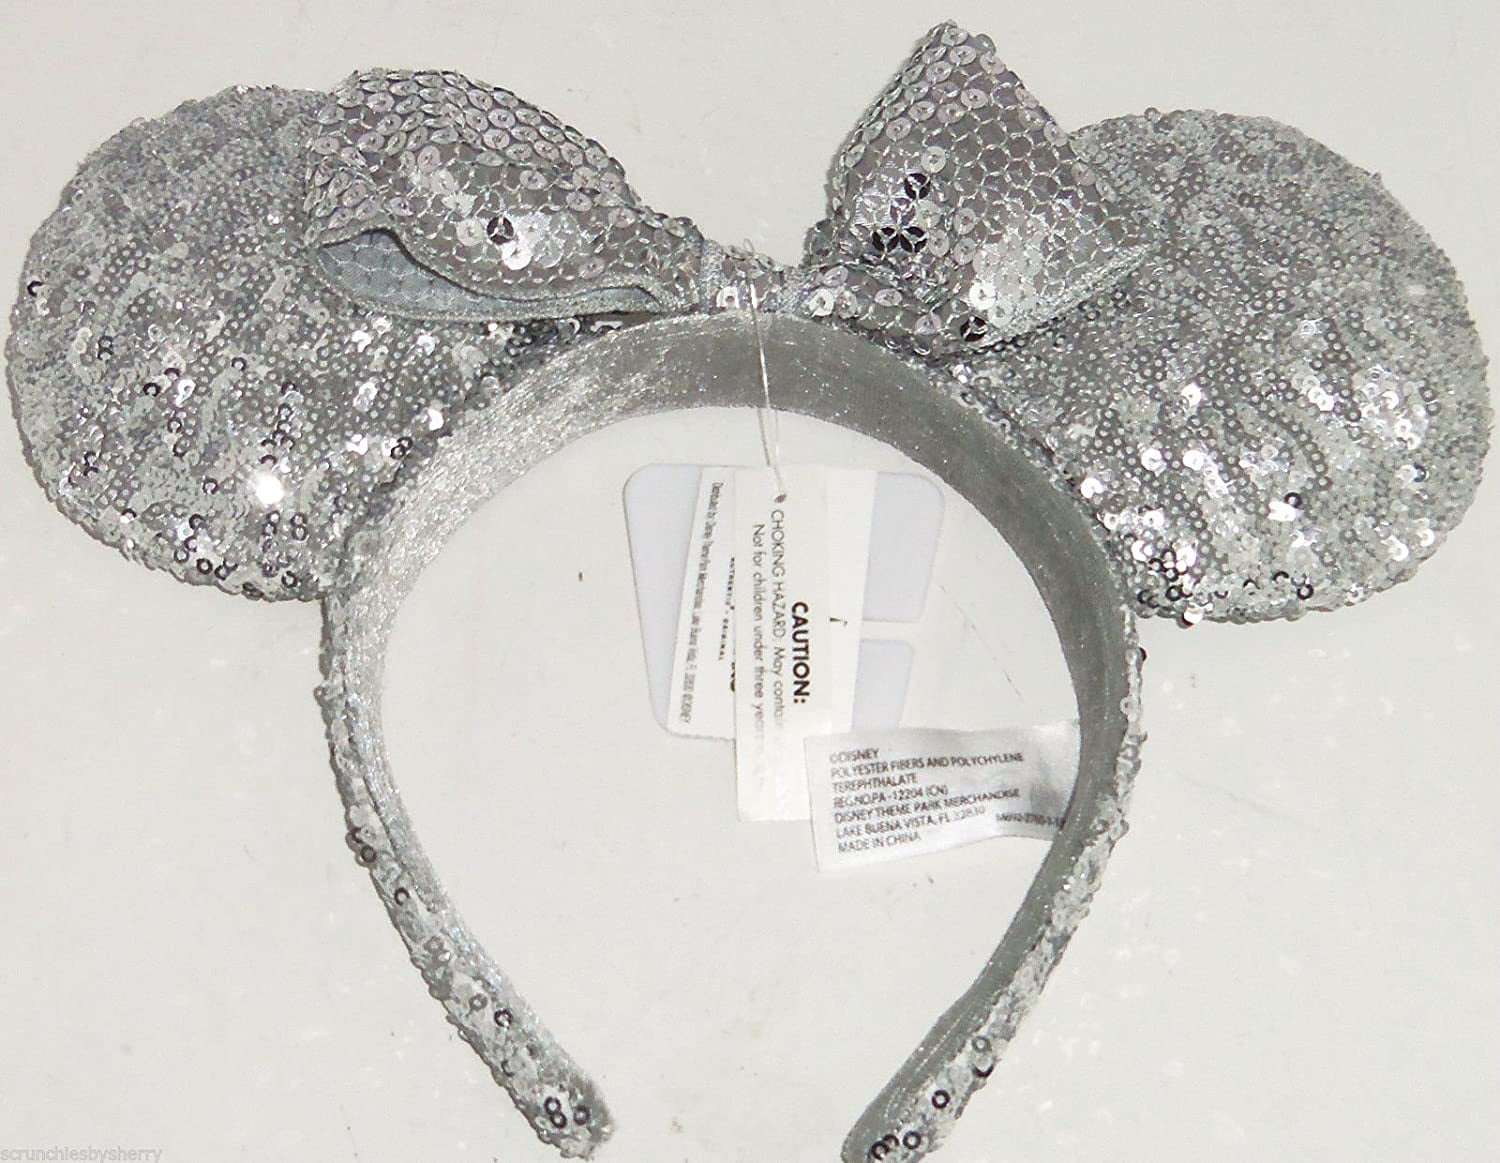 Details about   Bow Mickey Sequins Minnie Ears Castle Jewel Silver Disney Parks Headband #80 